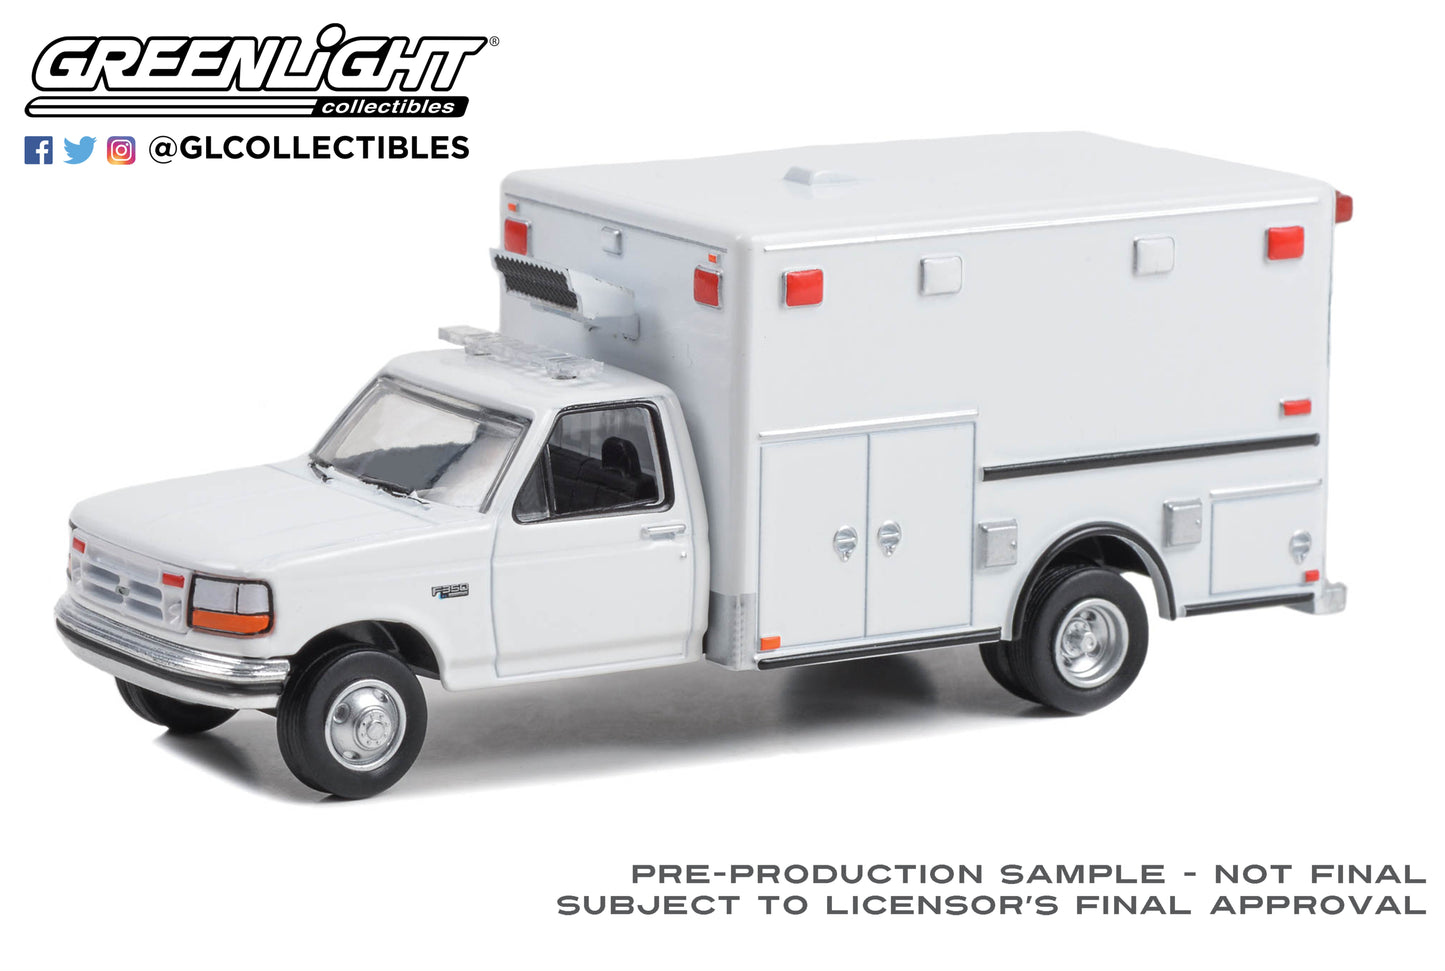 GreenLight 1:64 First Responders - 1992 Ford F-350 Ambulance - White 67061